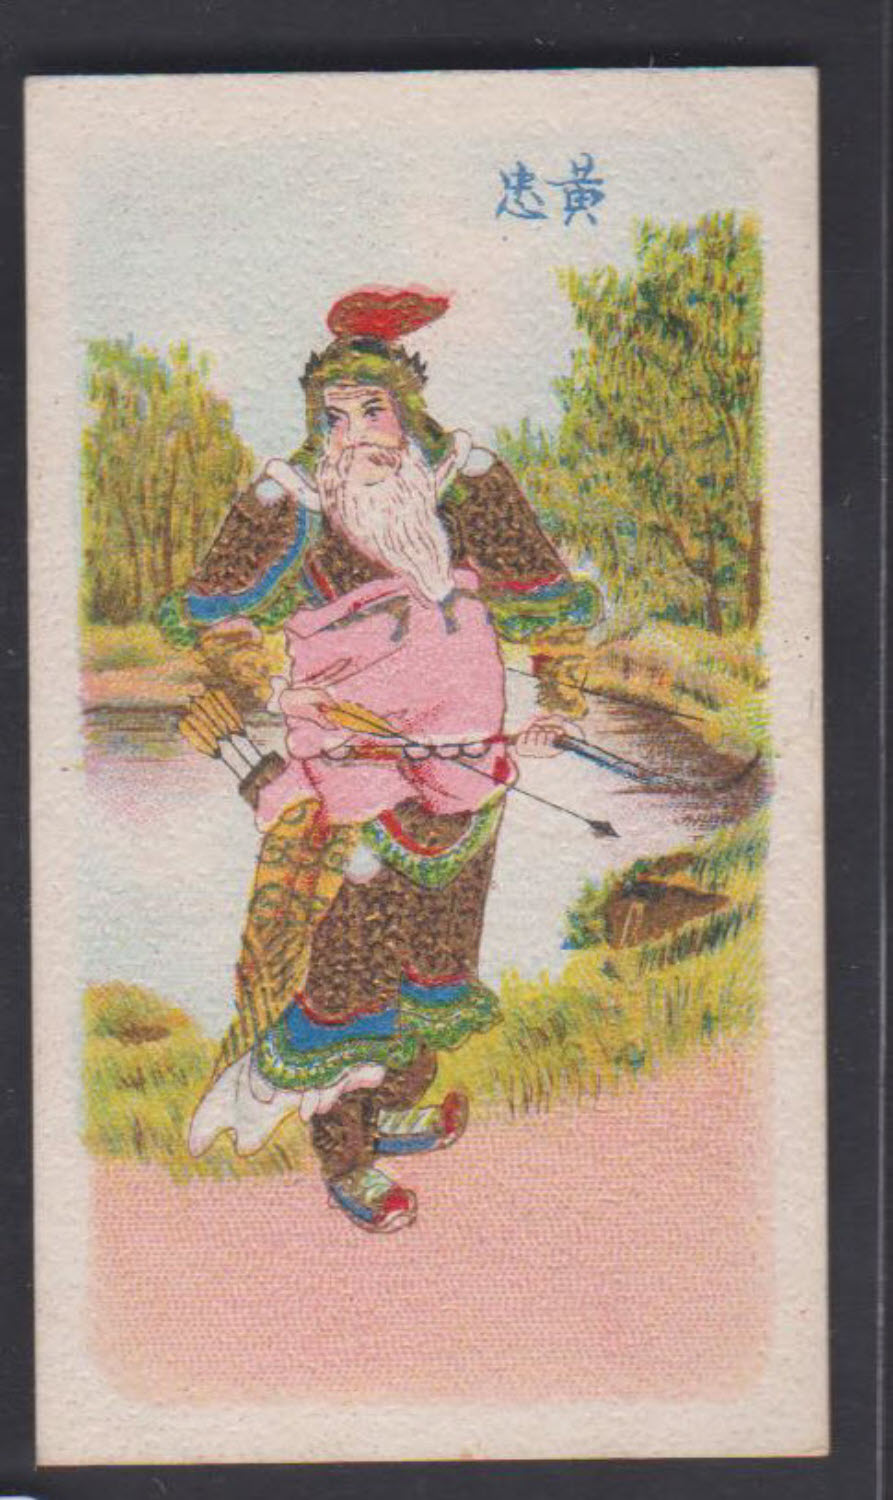 Wills (Pirate) - China's Ancient Warriors - No.64 Fig.98 Wills' Issues Book